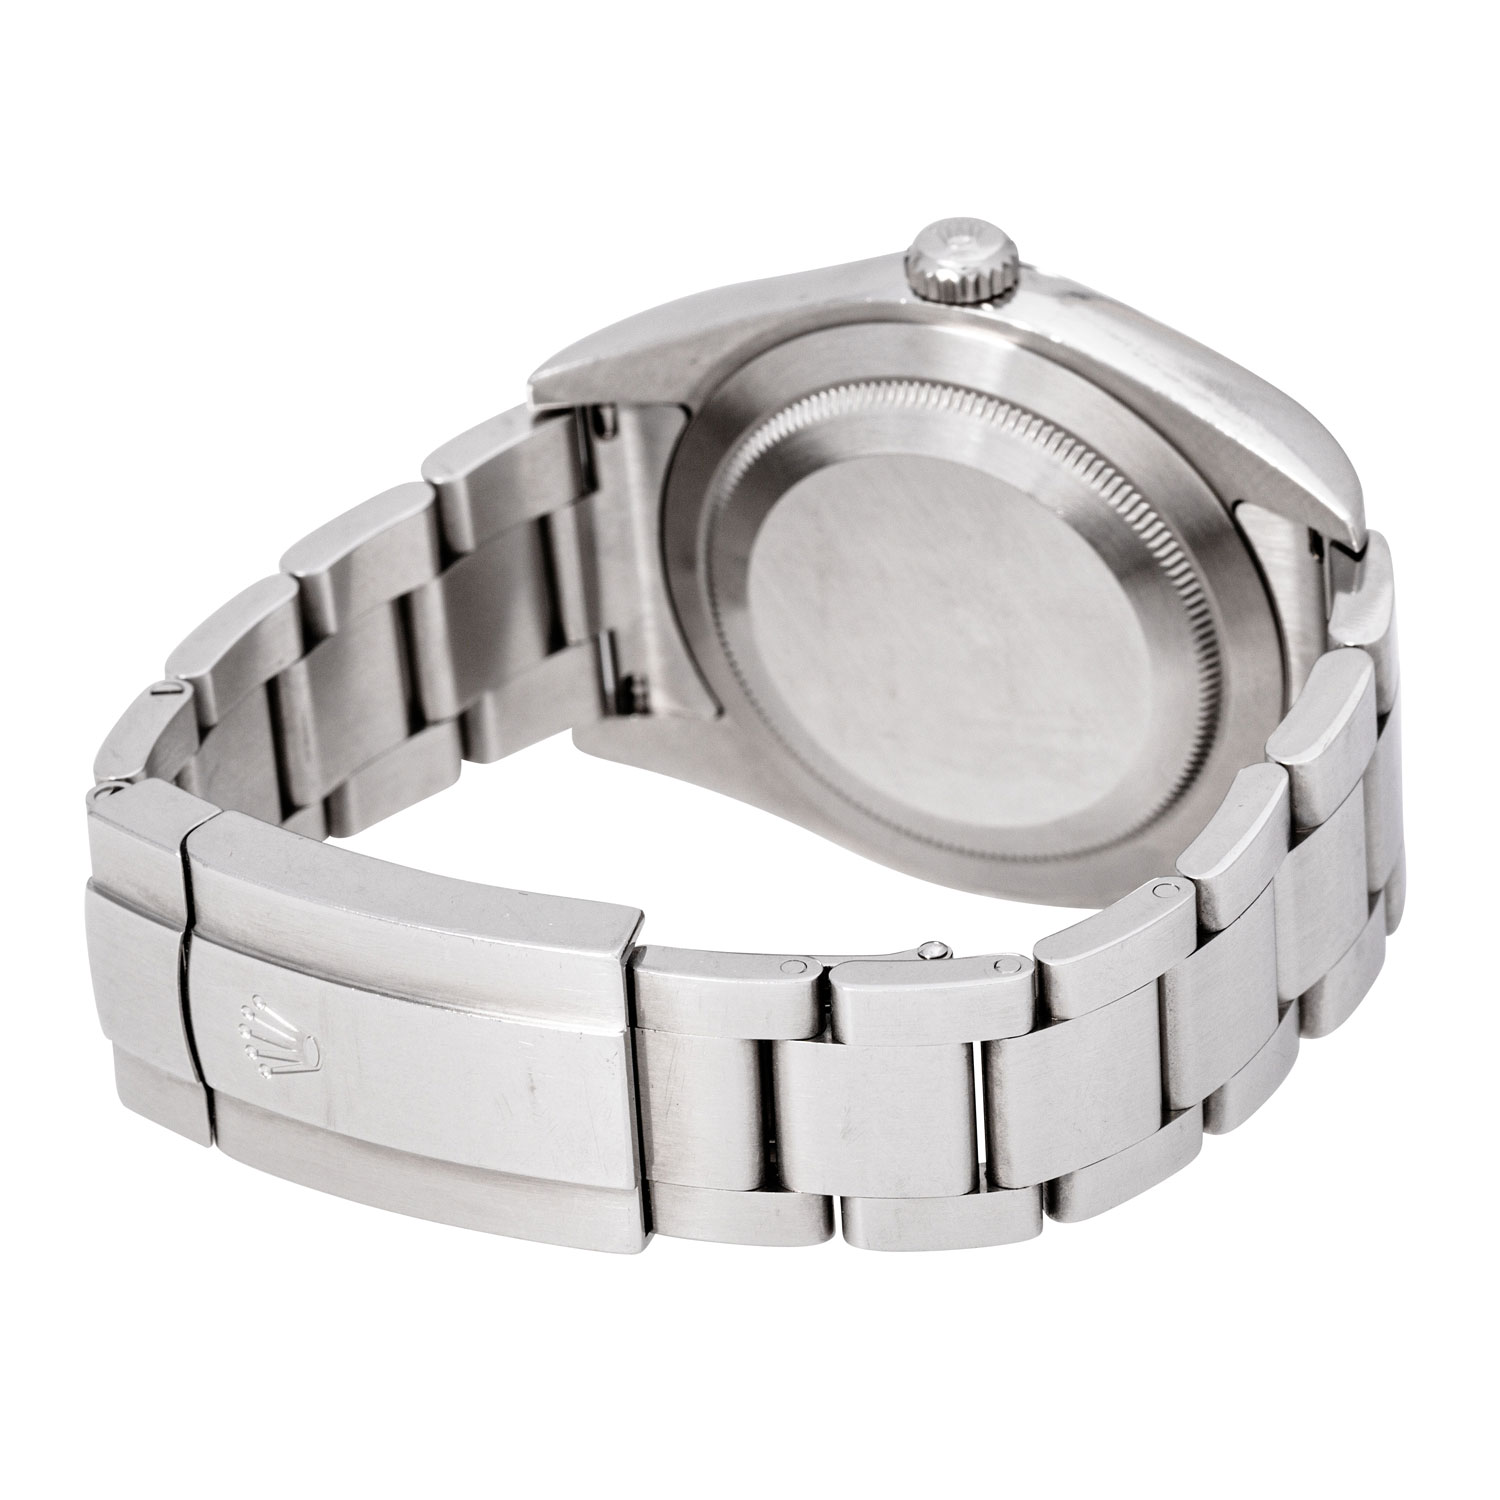 PFANDAUKTION - ROLEX Oyster Perpetual - Image 7 of 8